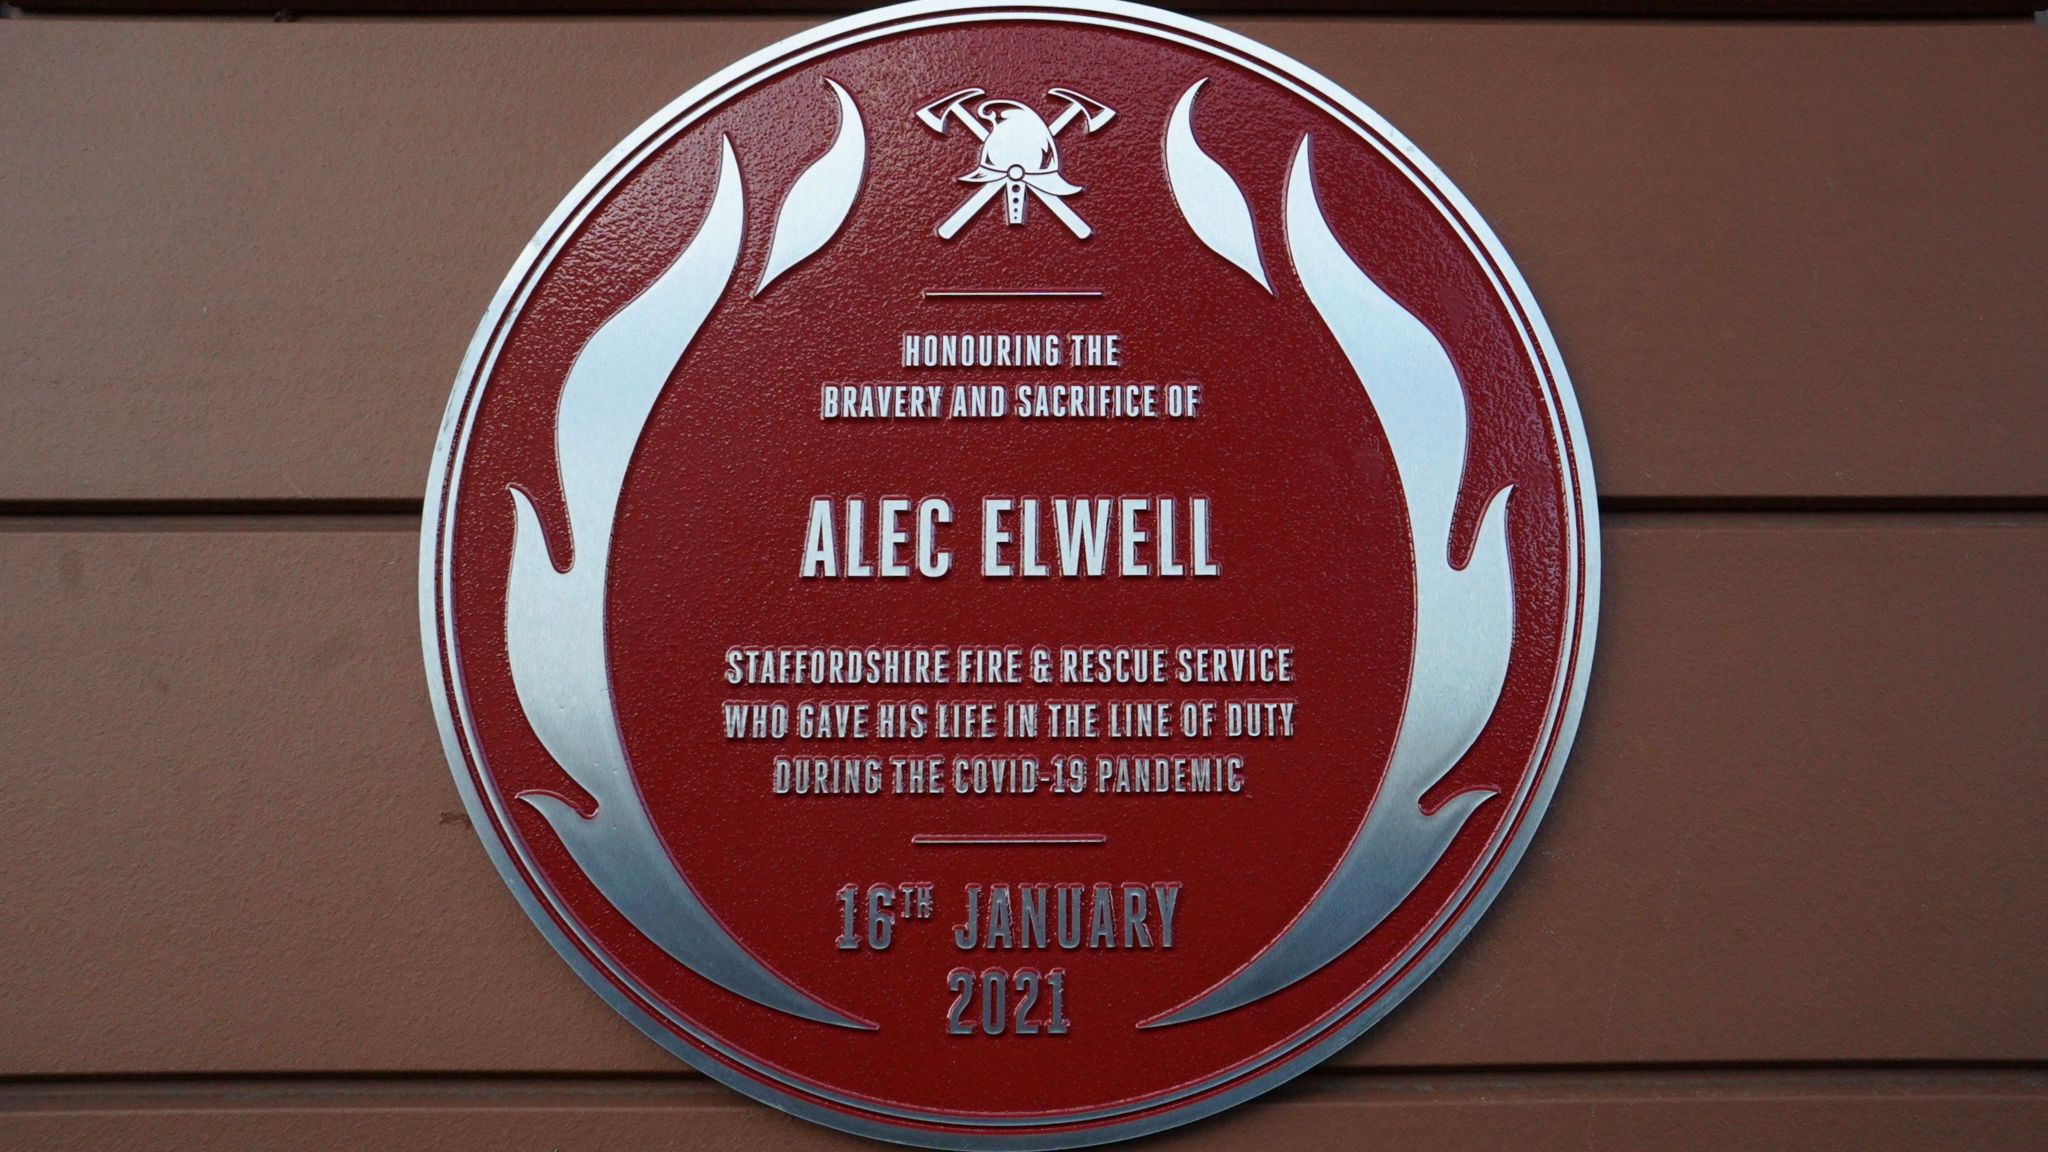 Alec Elwell's red plaque